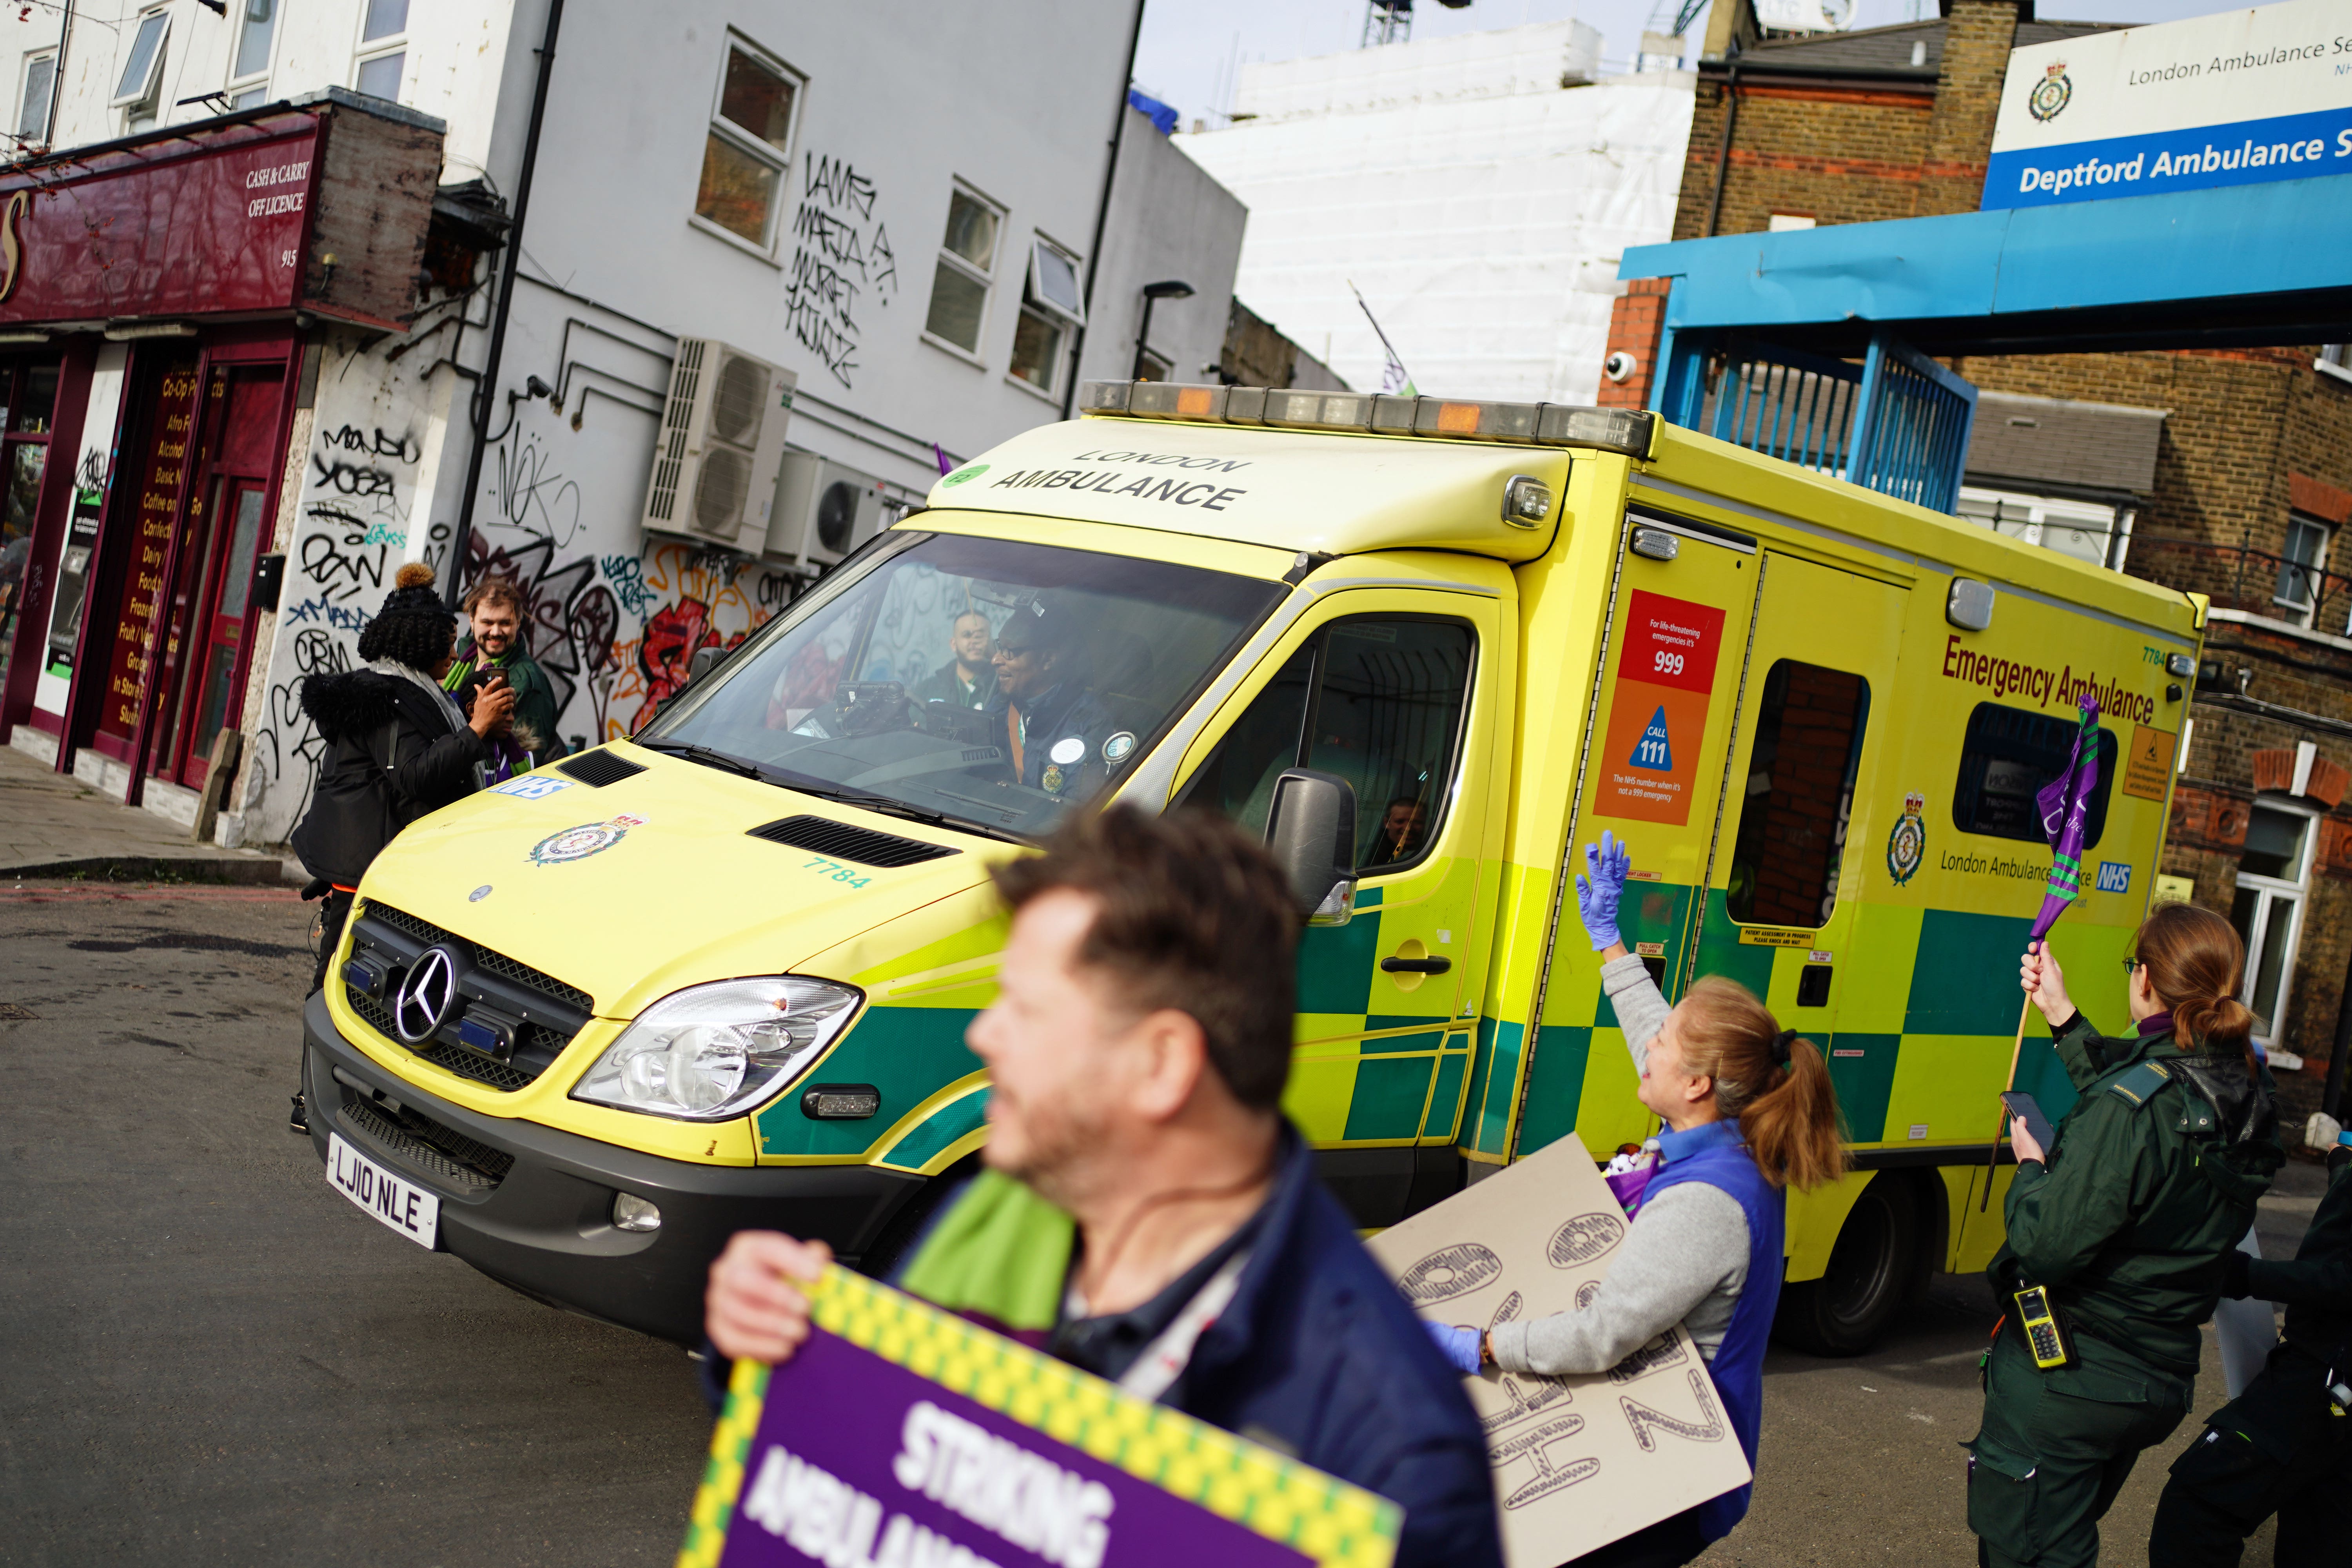 More ambulance workers are set to join the dispute after strike ballot results were returned